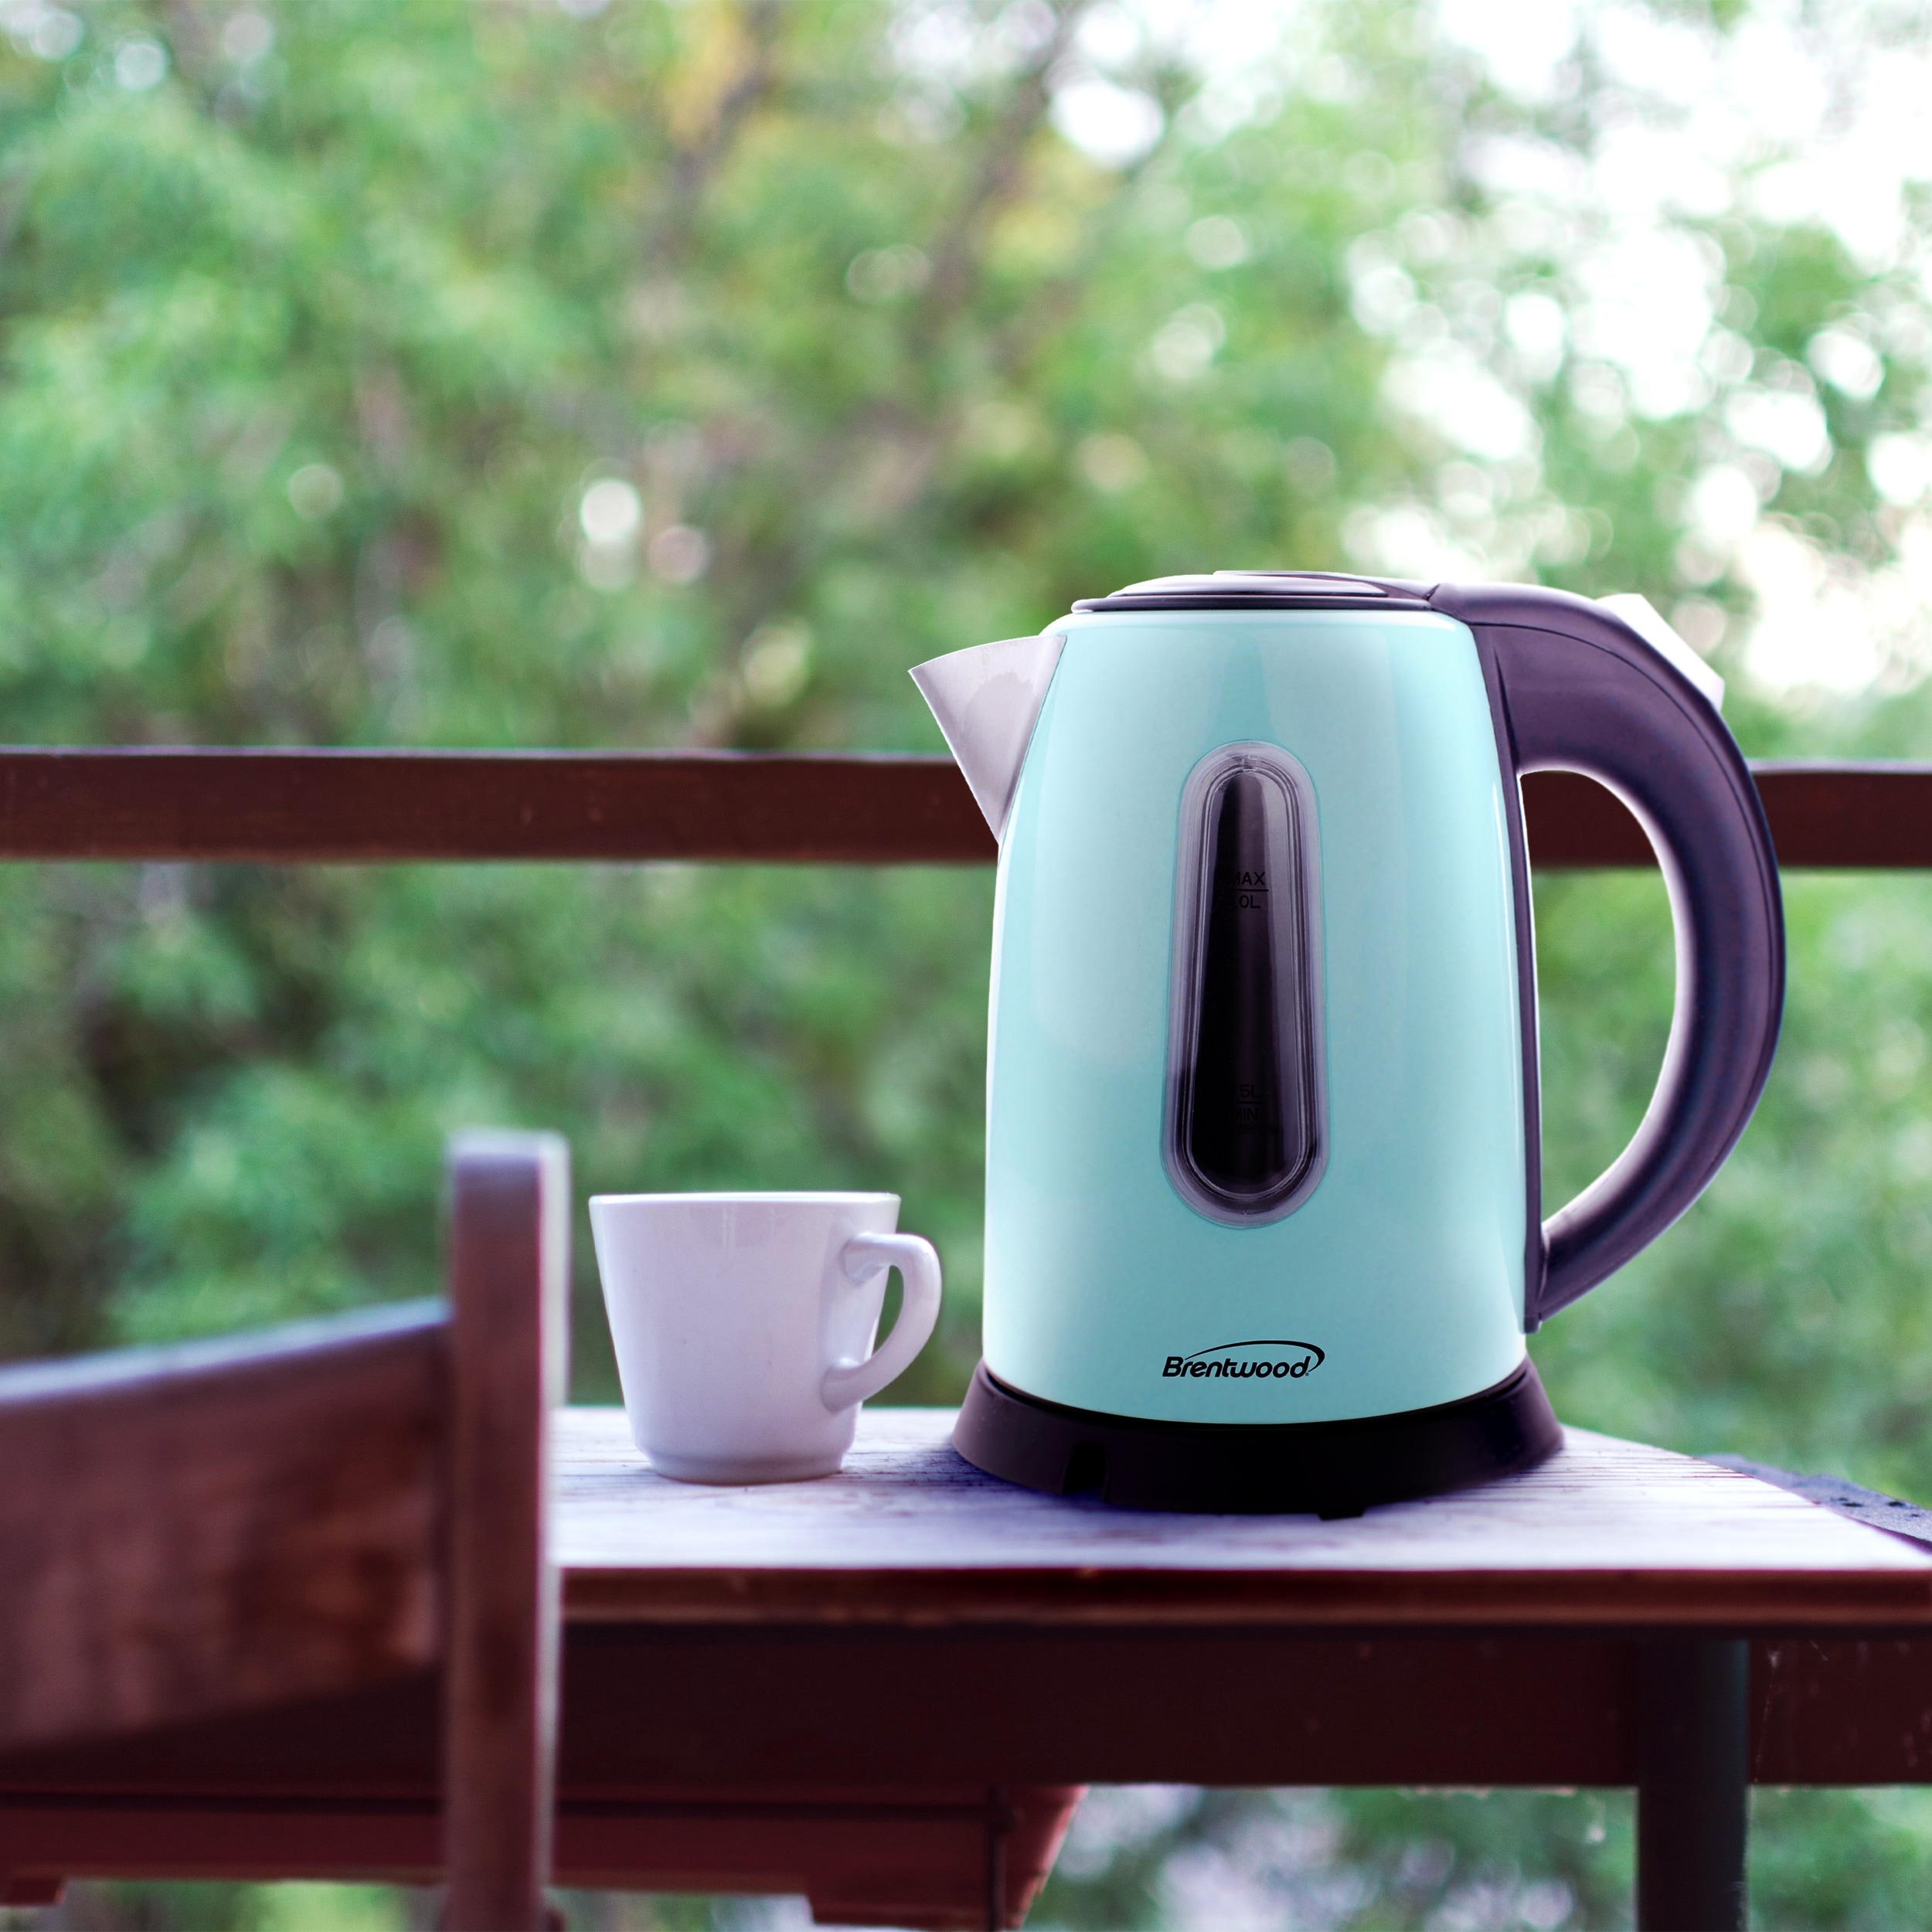 4.2 Cup Stainless Steel Cordless Electric Kettle in Teal - On Sale